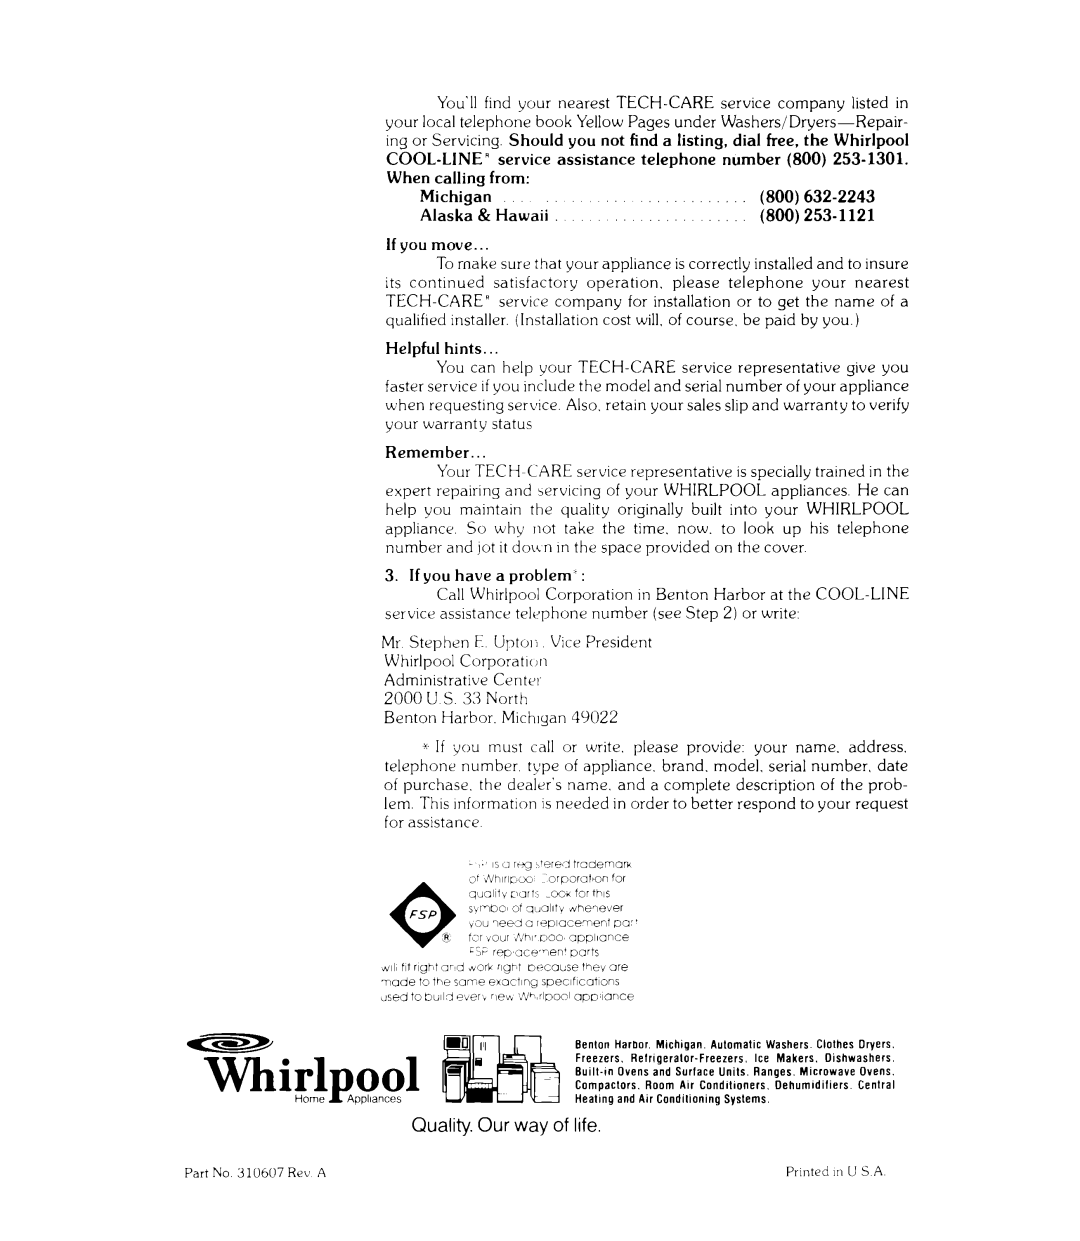 Whirlpool RJE-395P, RJE-390P manual YLirlpool, Quality. Our way of life 